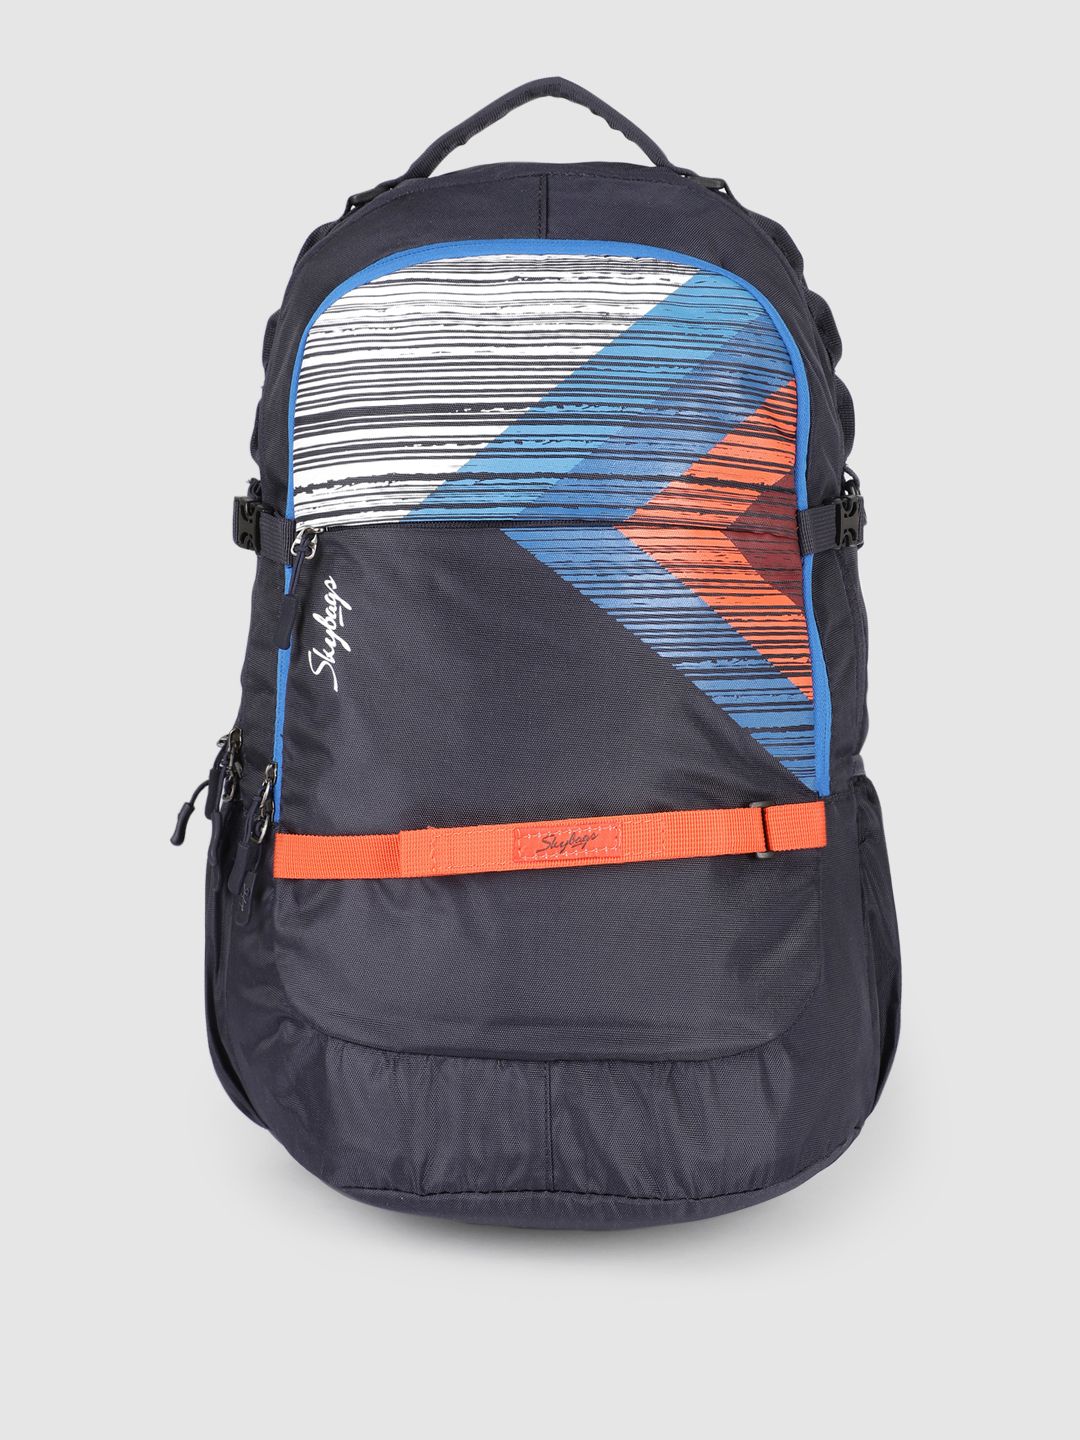 Skybags Unisex Multicoloured Graphic Cruze Laptop Backpack Price in India